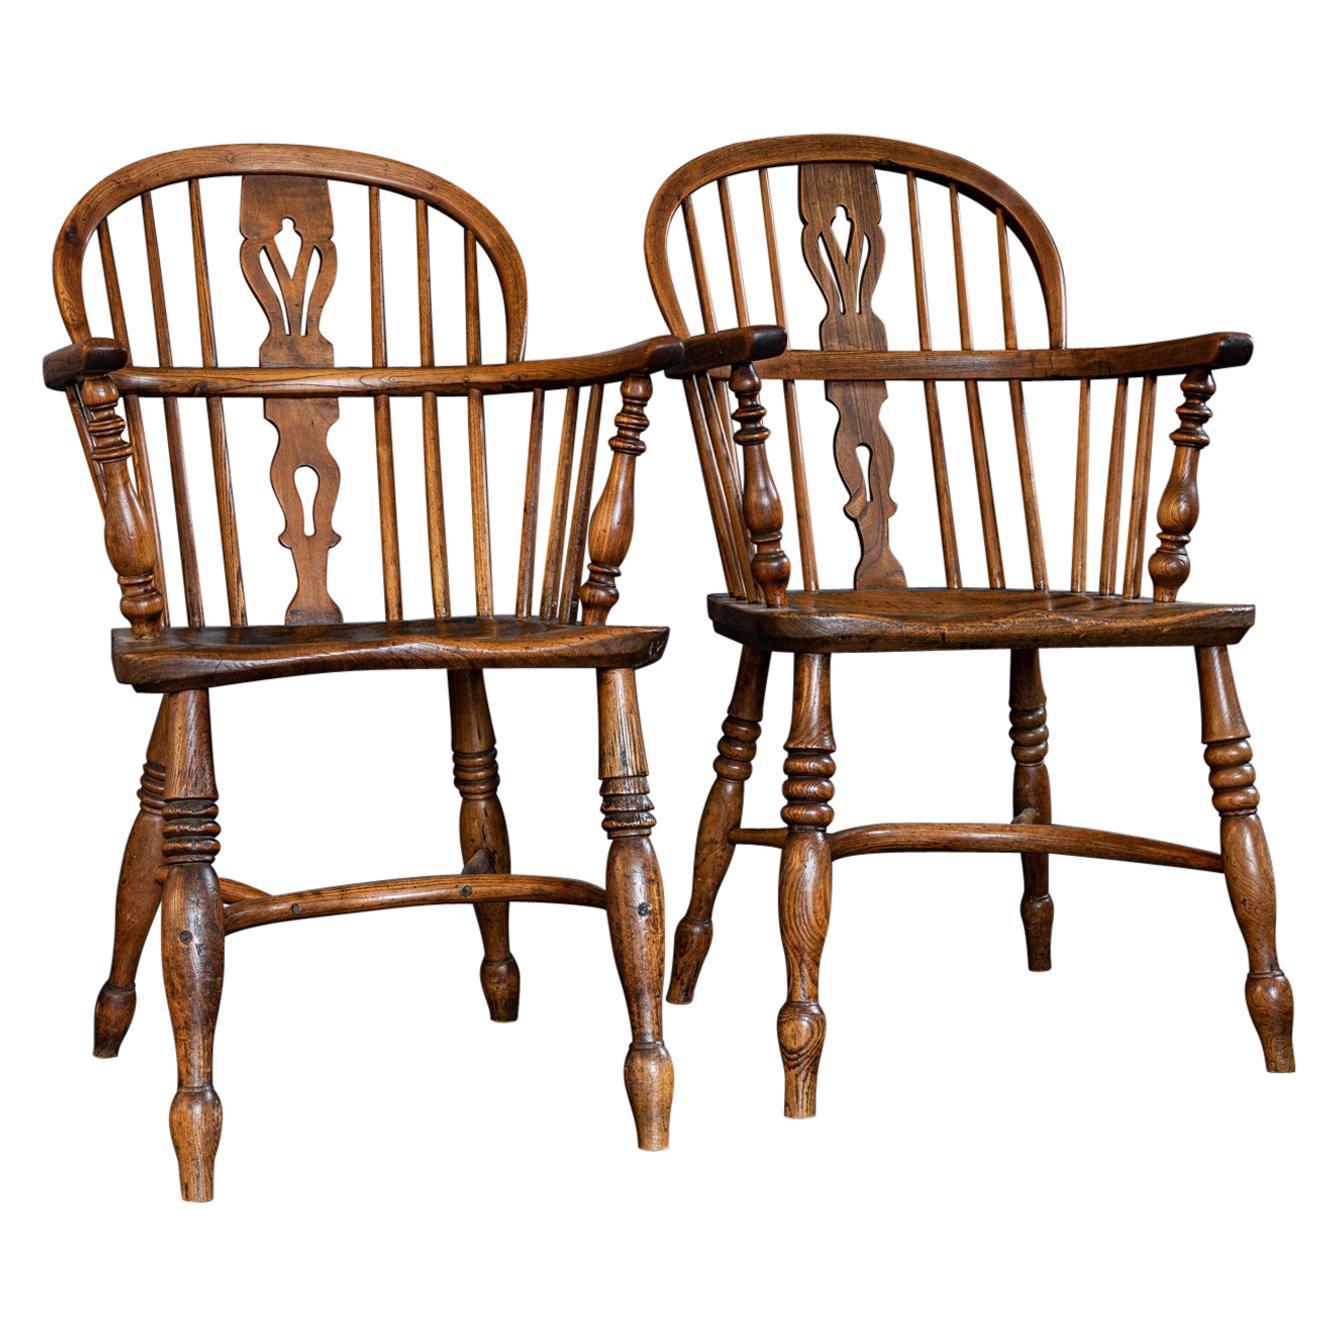 Pair of English 19th Century Windsor Chairs